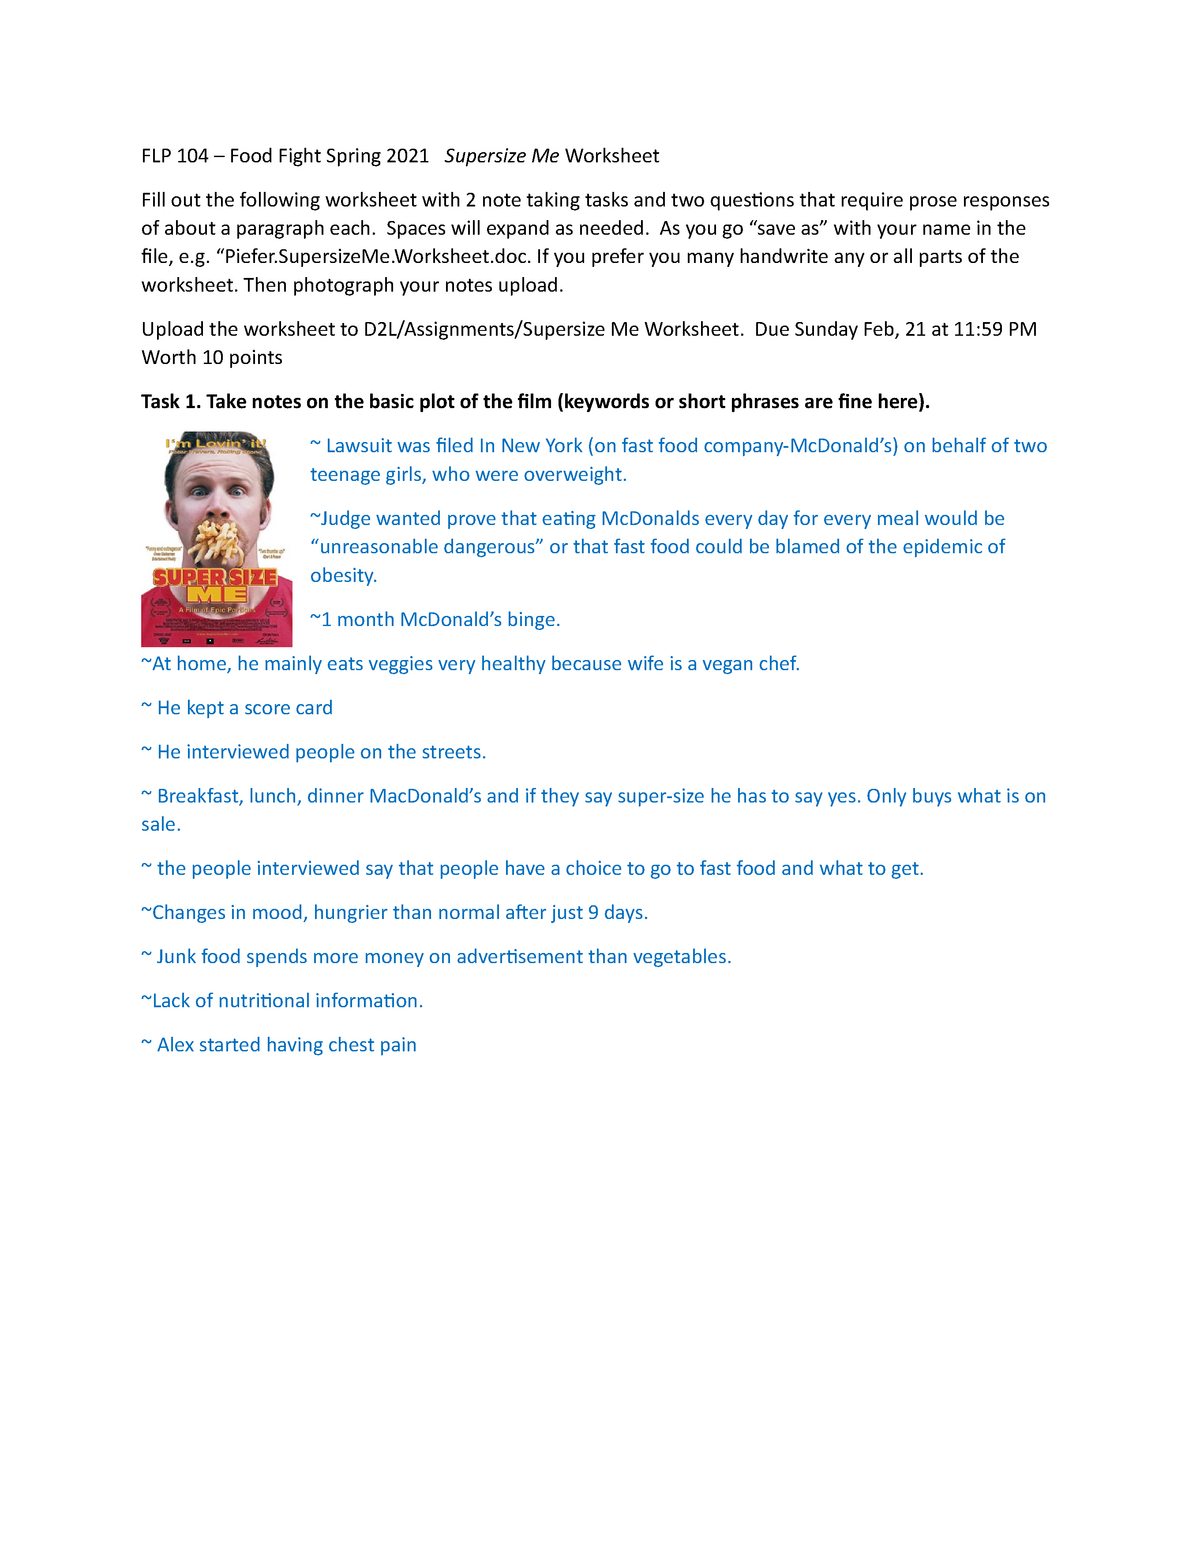 Supersize Me answers - FLP 21 – Food Fight Spring 21 Supersize In Super Size Me Worksheet Answers